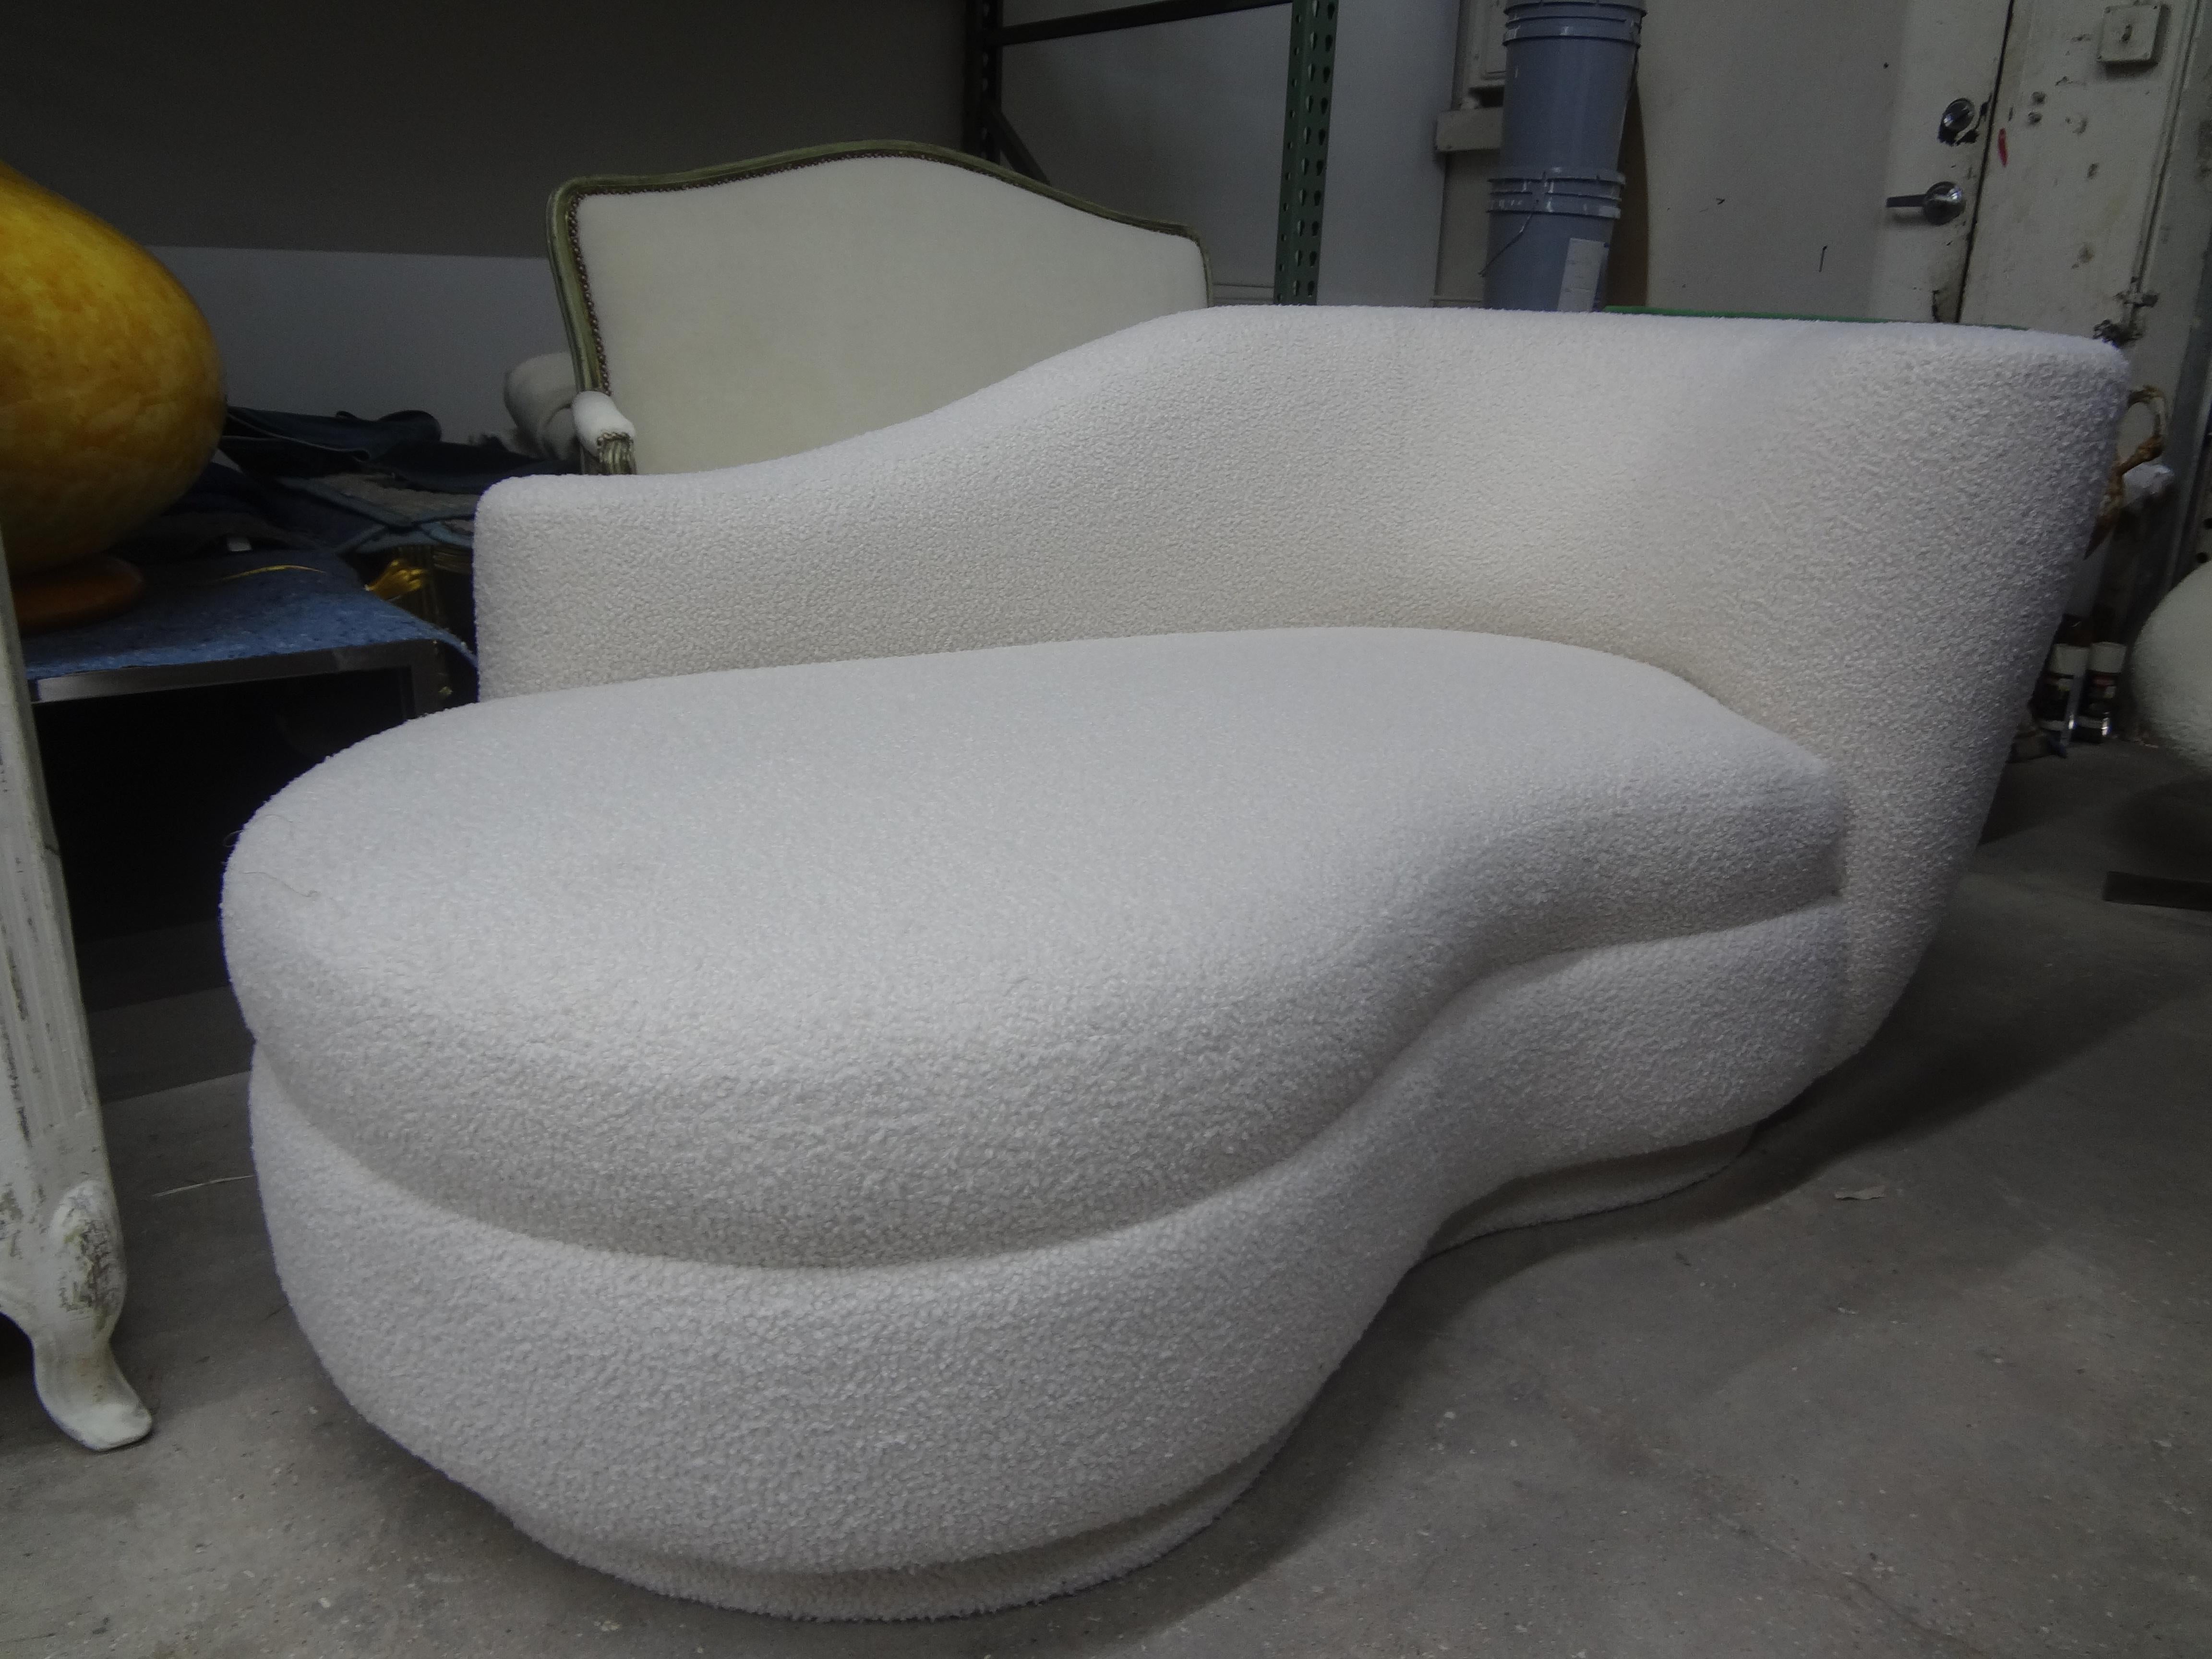 Postmodern Vladimir Kagan inspired chaise. This stunning postmodern chaise was most likely made by Weiman and was inspired by the designs of Vladimir Kagan's cloud series. Great size that could be used as a sofa, chaise or extra seating in any room.